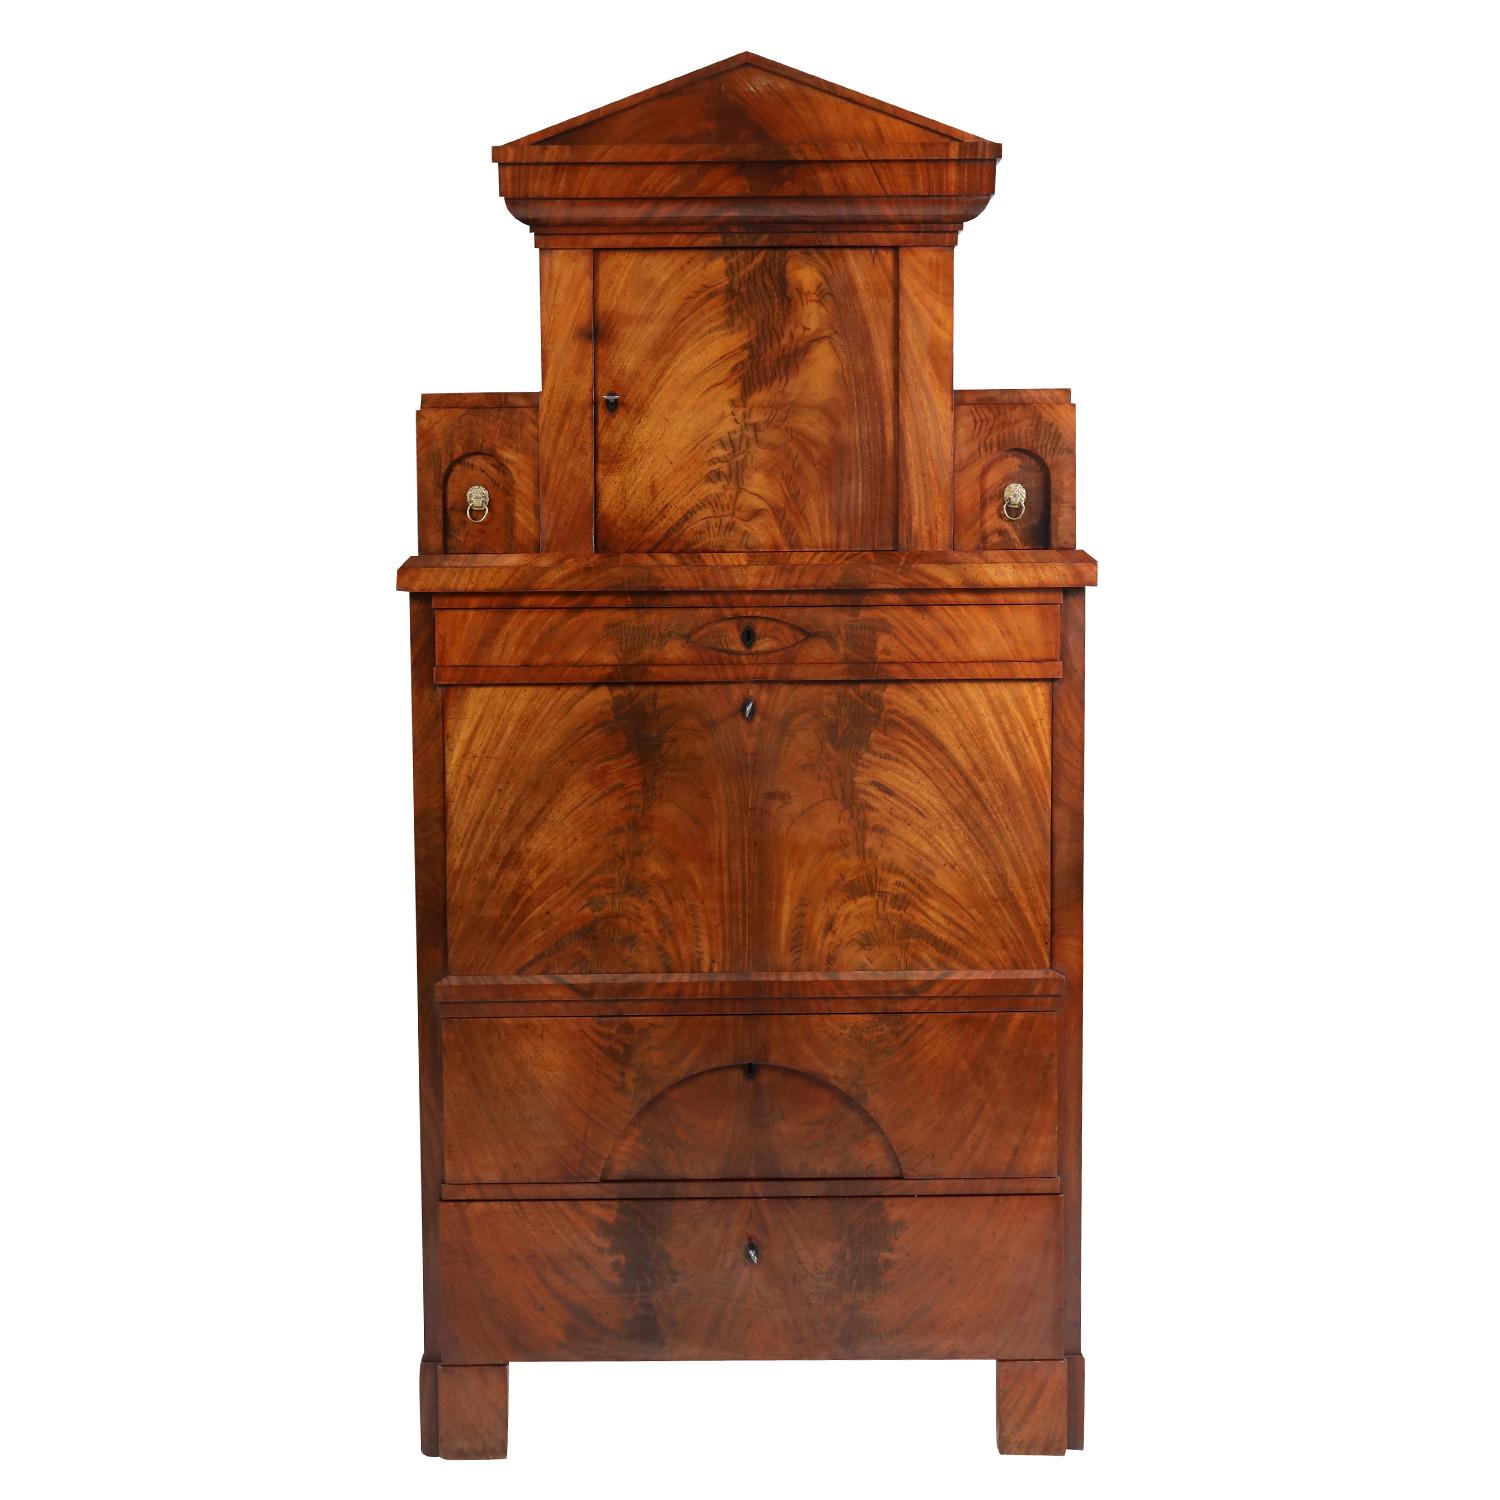 A dark-brown, antique German Biedermeier two-part cabinet with a writing flap made of handcrafted veneered Mahogany, in good condition. The bottom part of the shellac polished secretary is composed with two large drawers, standing on four wide